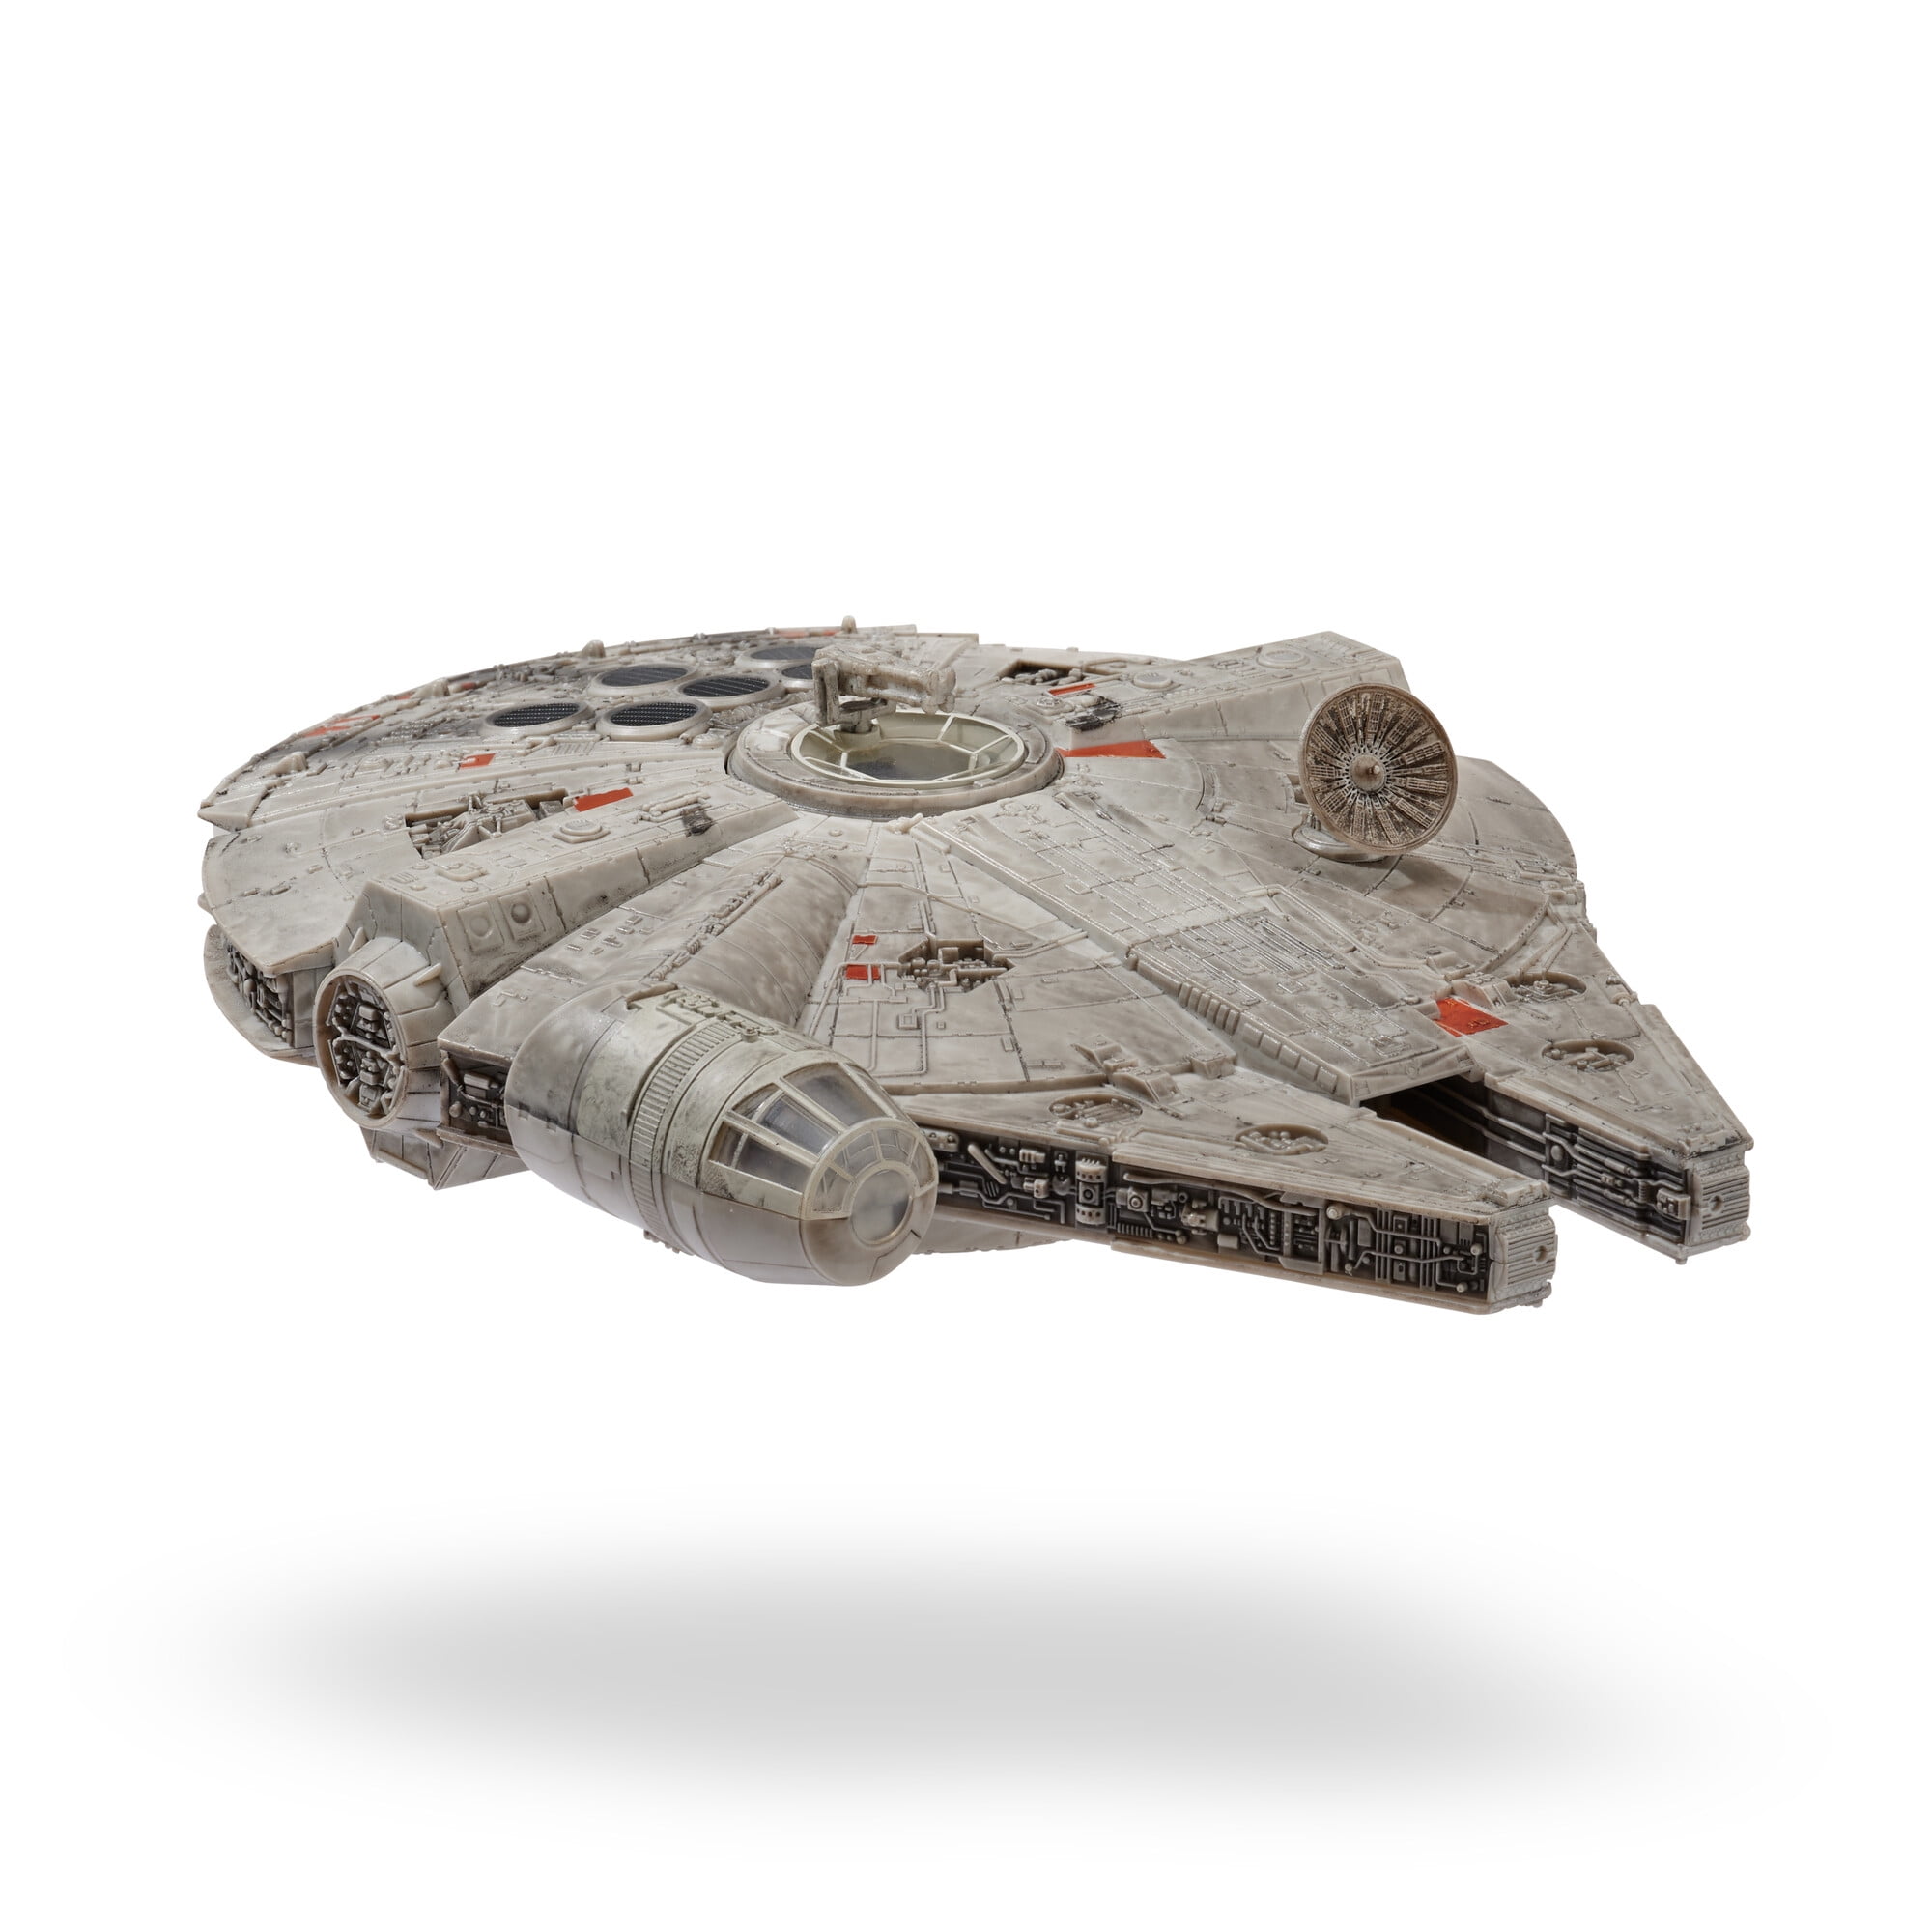 Star Wars 84794328 Millennium Falcon - MICRO GALAXY SQUADRON Assault Class 7-Inch Vehicle with 4 Micro Figures